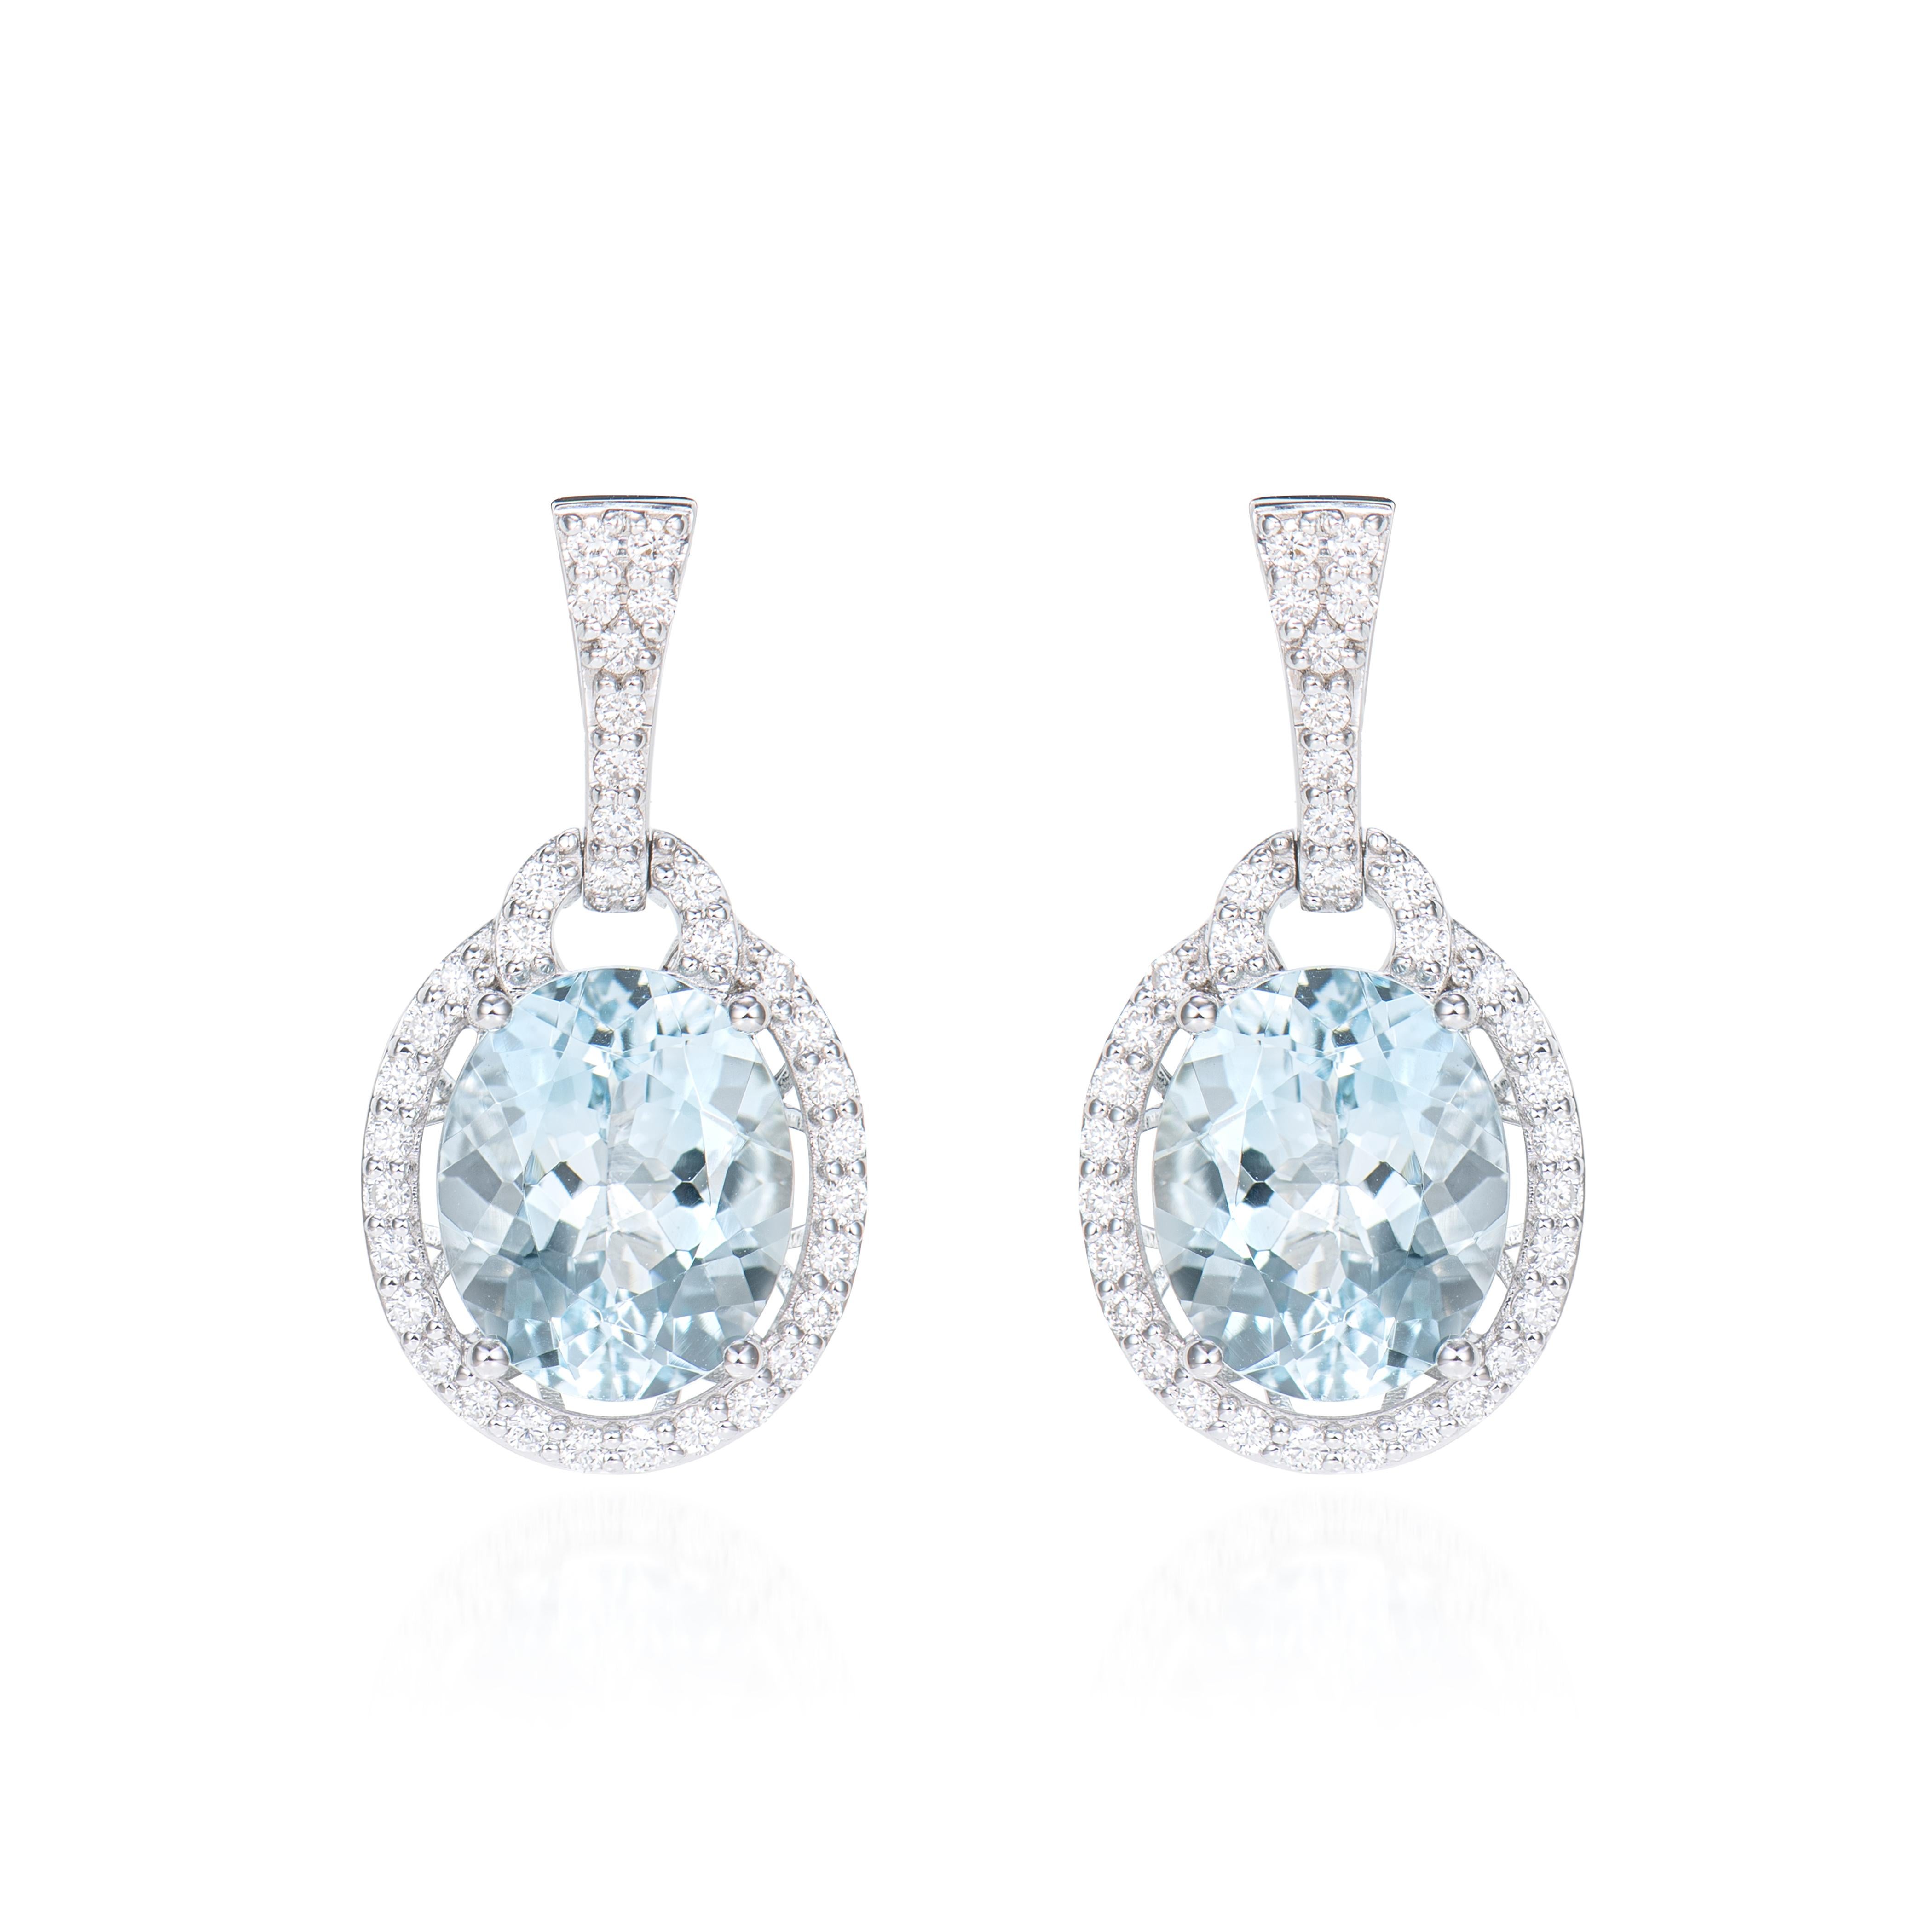 Contemporary 6.38 Carat Aquamarine Drop Earrings in 18Karat White Gold with Diamond For Sale